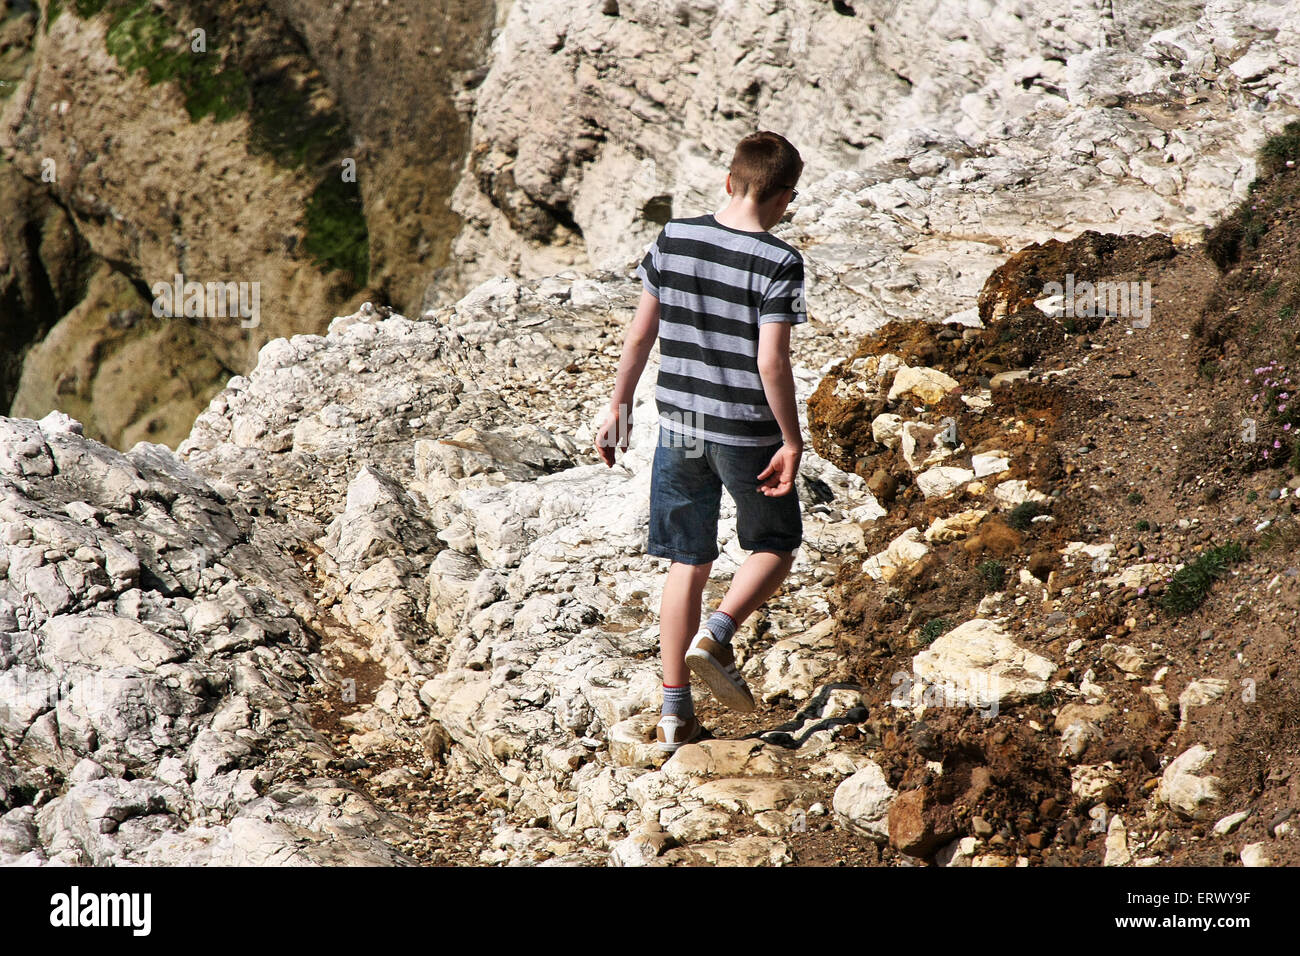 Young people on cliff face path in dangerous conditions. Stock Photo